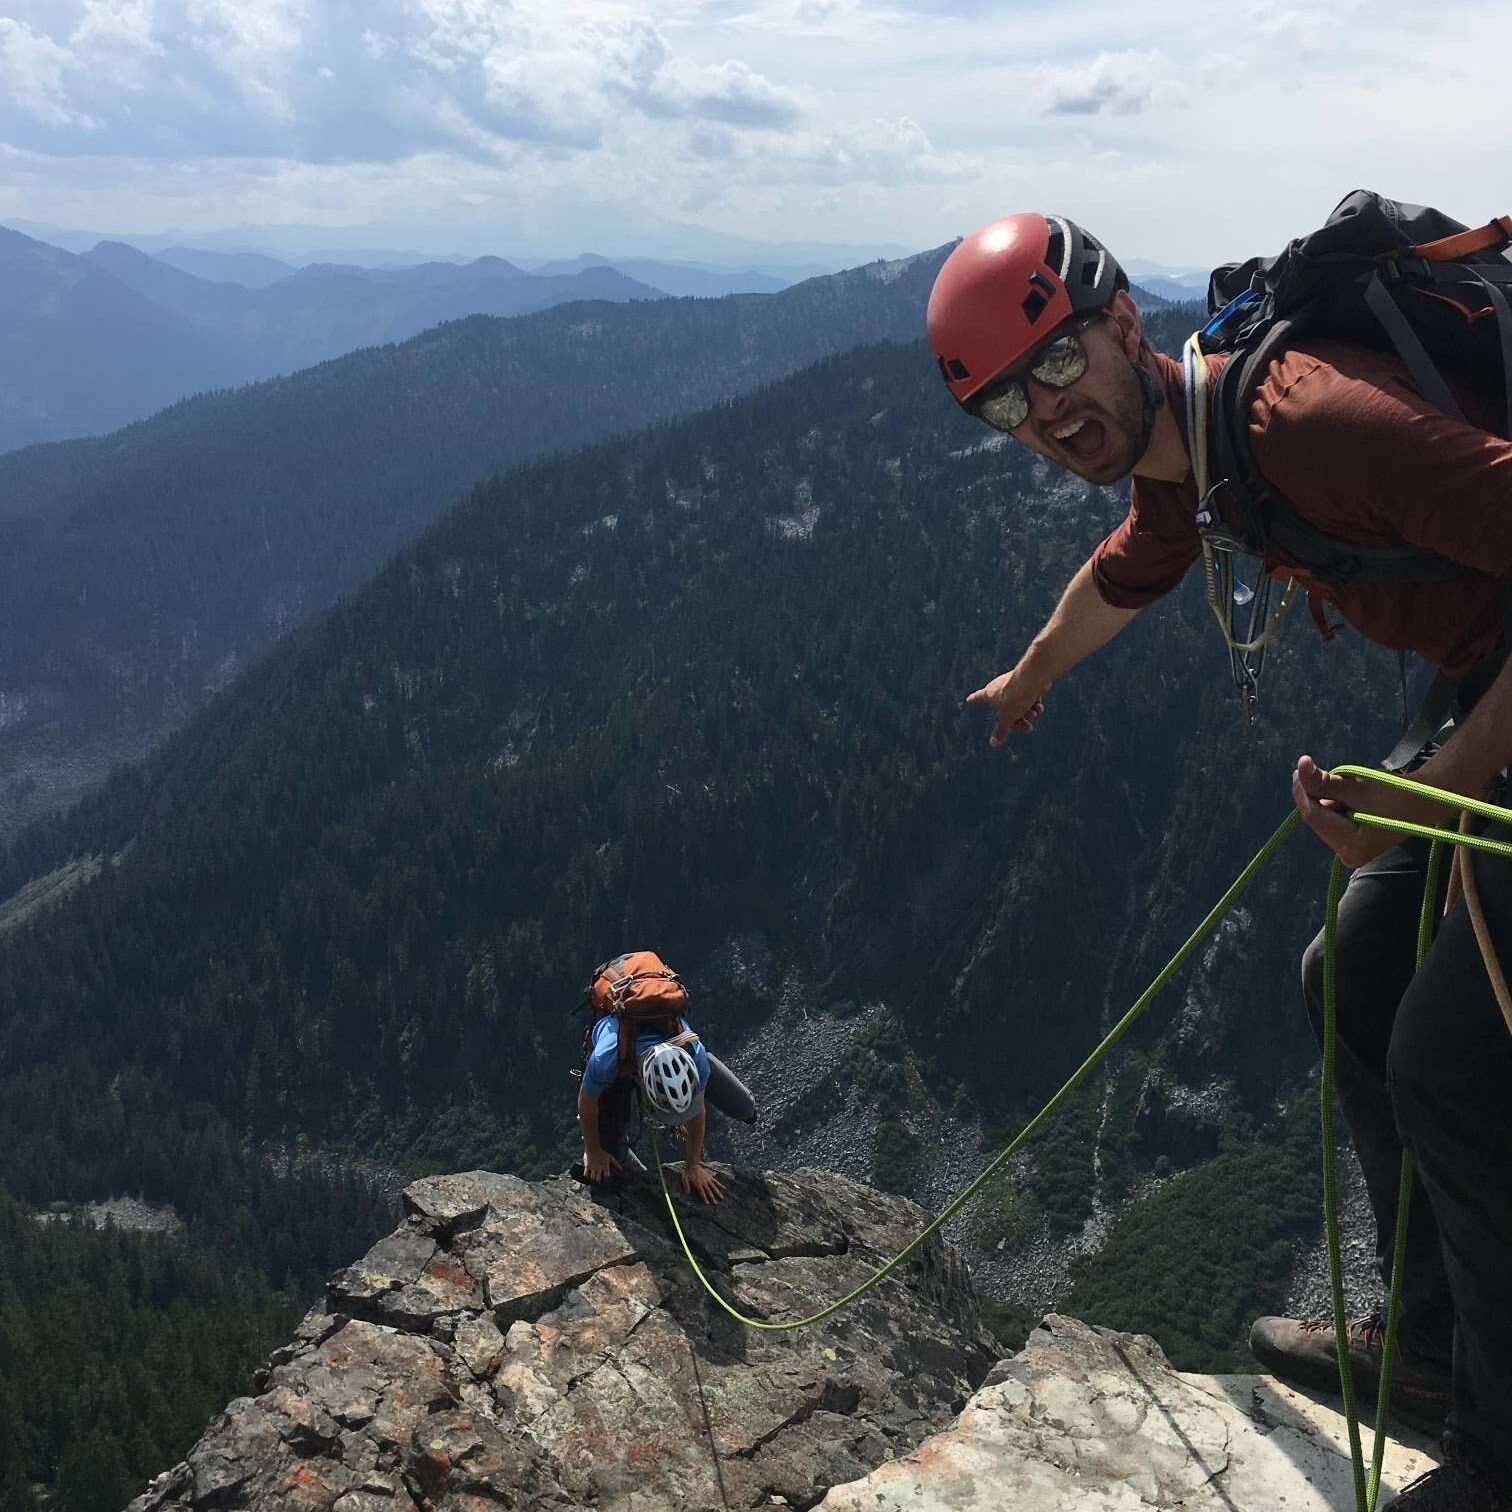 Two climbers on a rocky mountain with helmets and climbing gear.